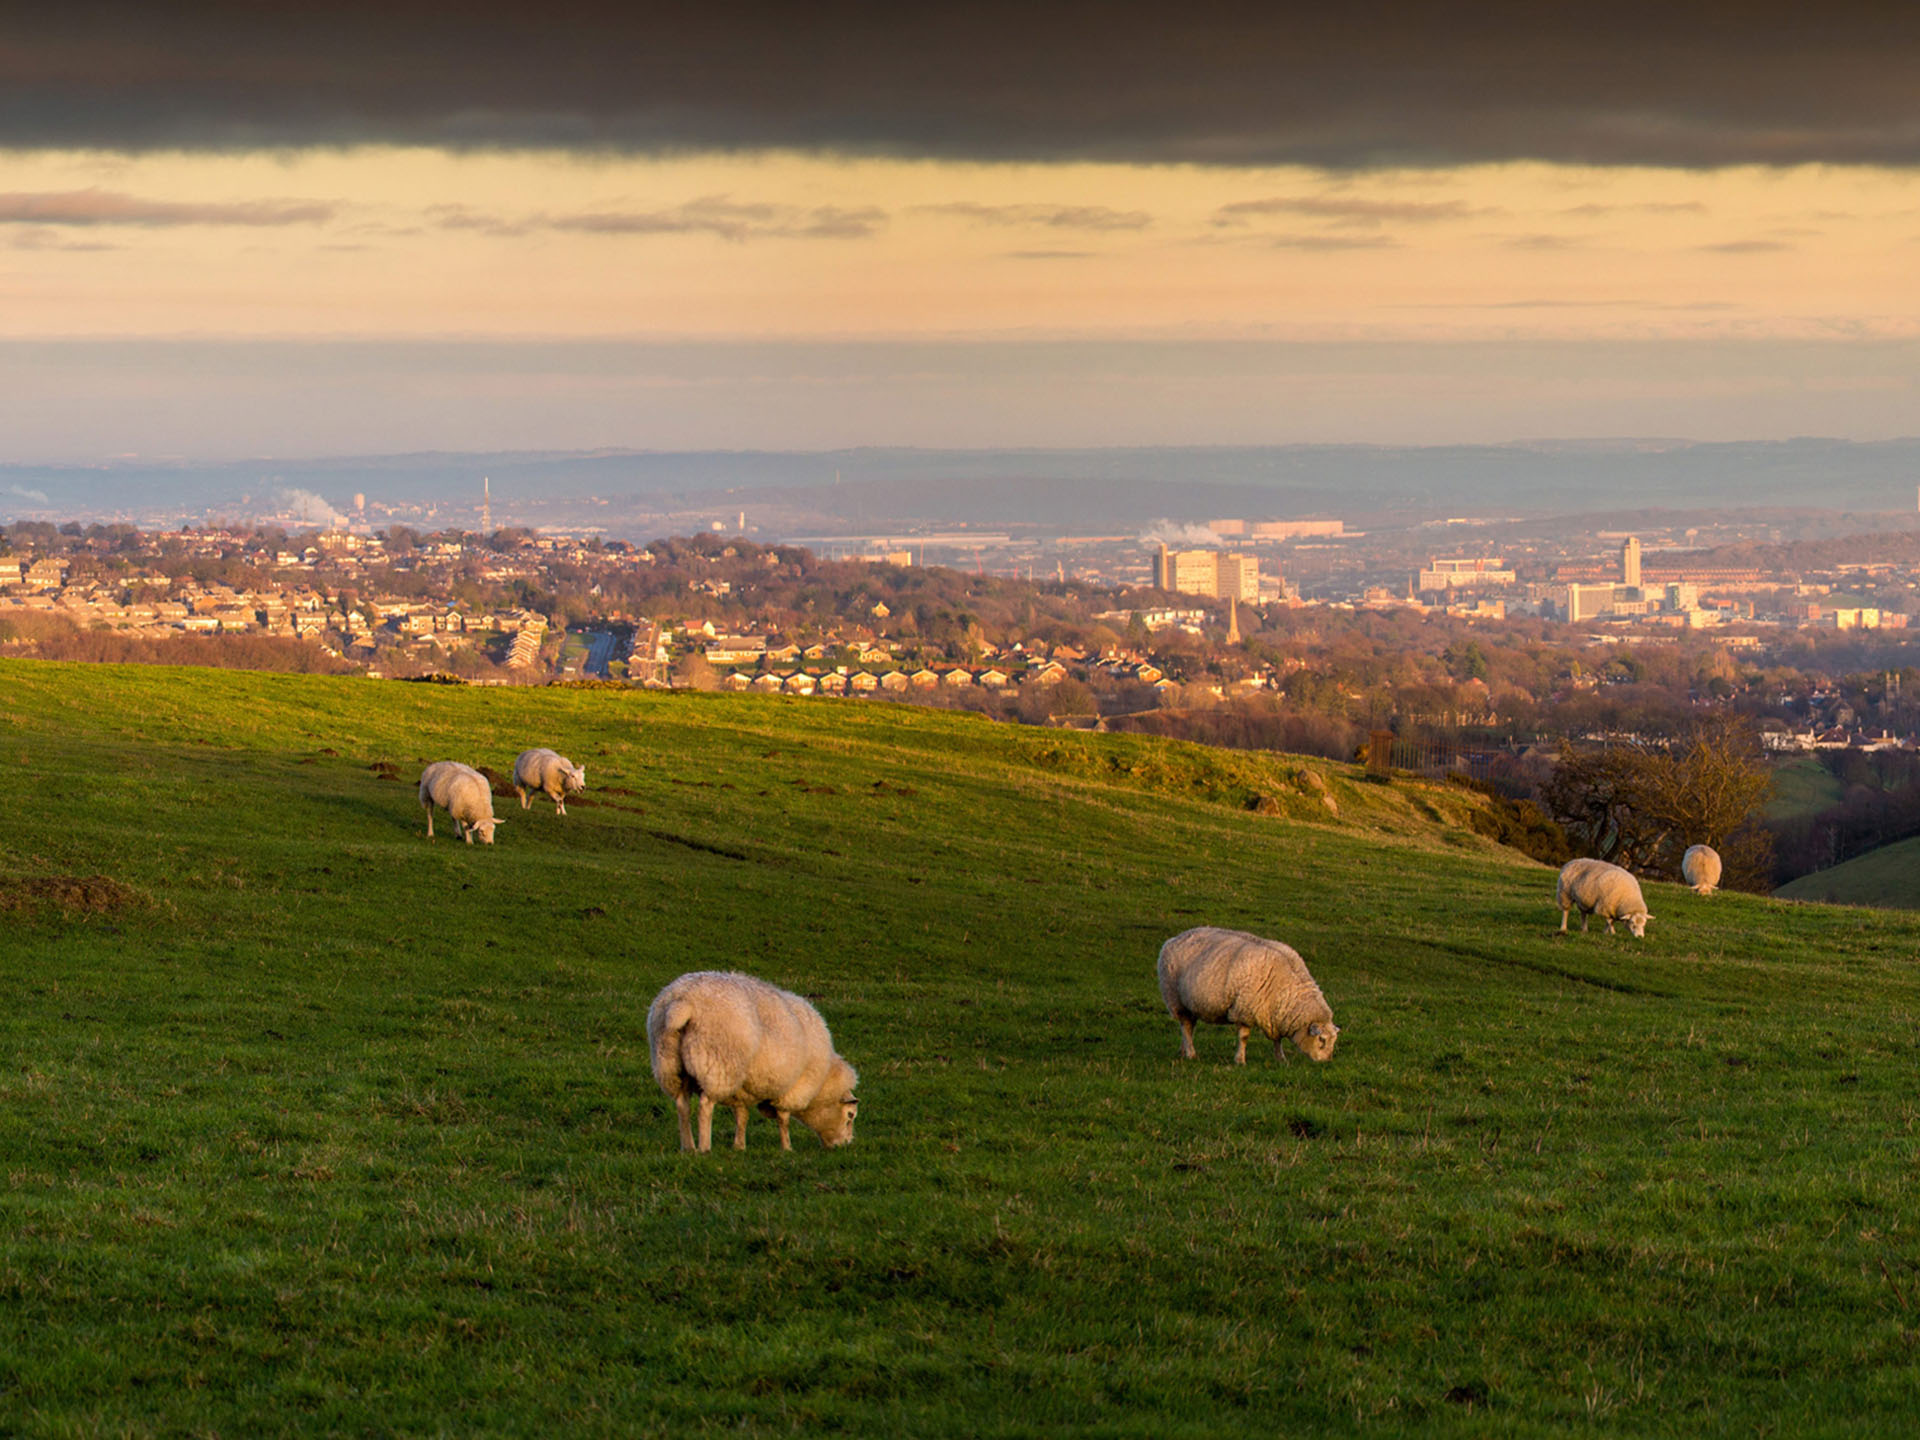 Sheep grazing in fields with Sheffield city in the backdrop